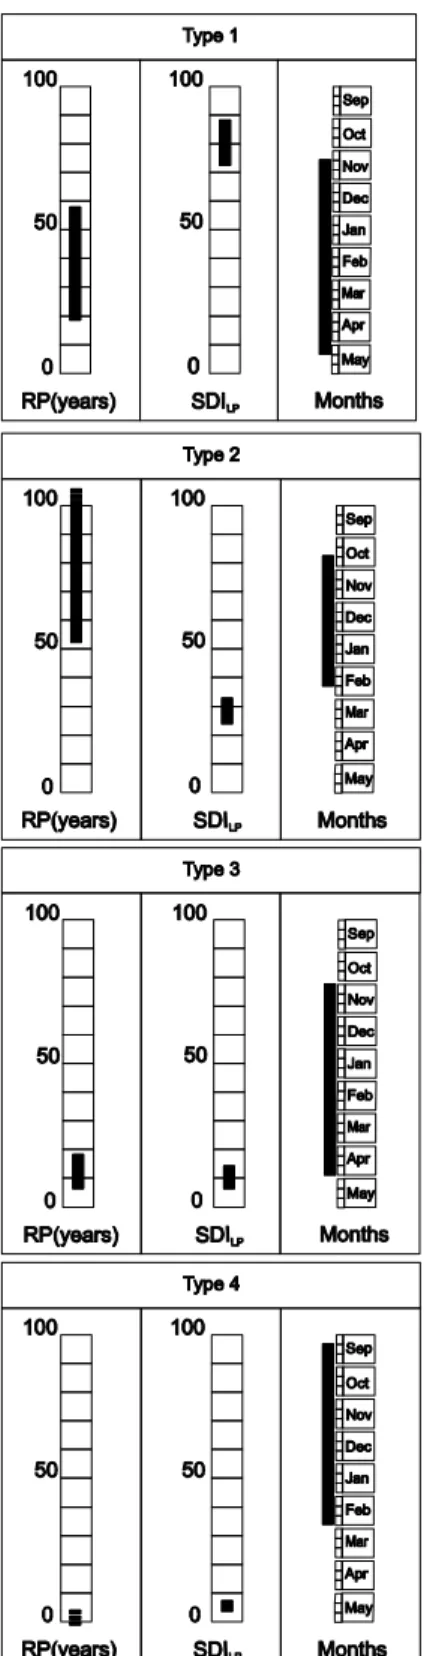 Fig. 5. Types of LPs affecting the study area. For each type, three columns are used: the first indicates the RPs (the limits of the bar are the average and maximum value surveyed, respectively), the  sec-ond represents the SDI LP (the limits of the bar ar